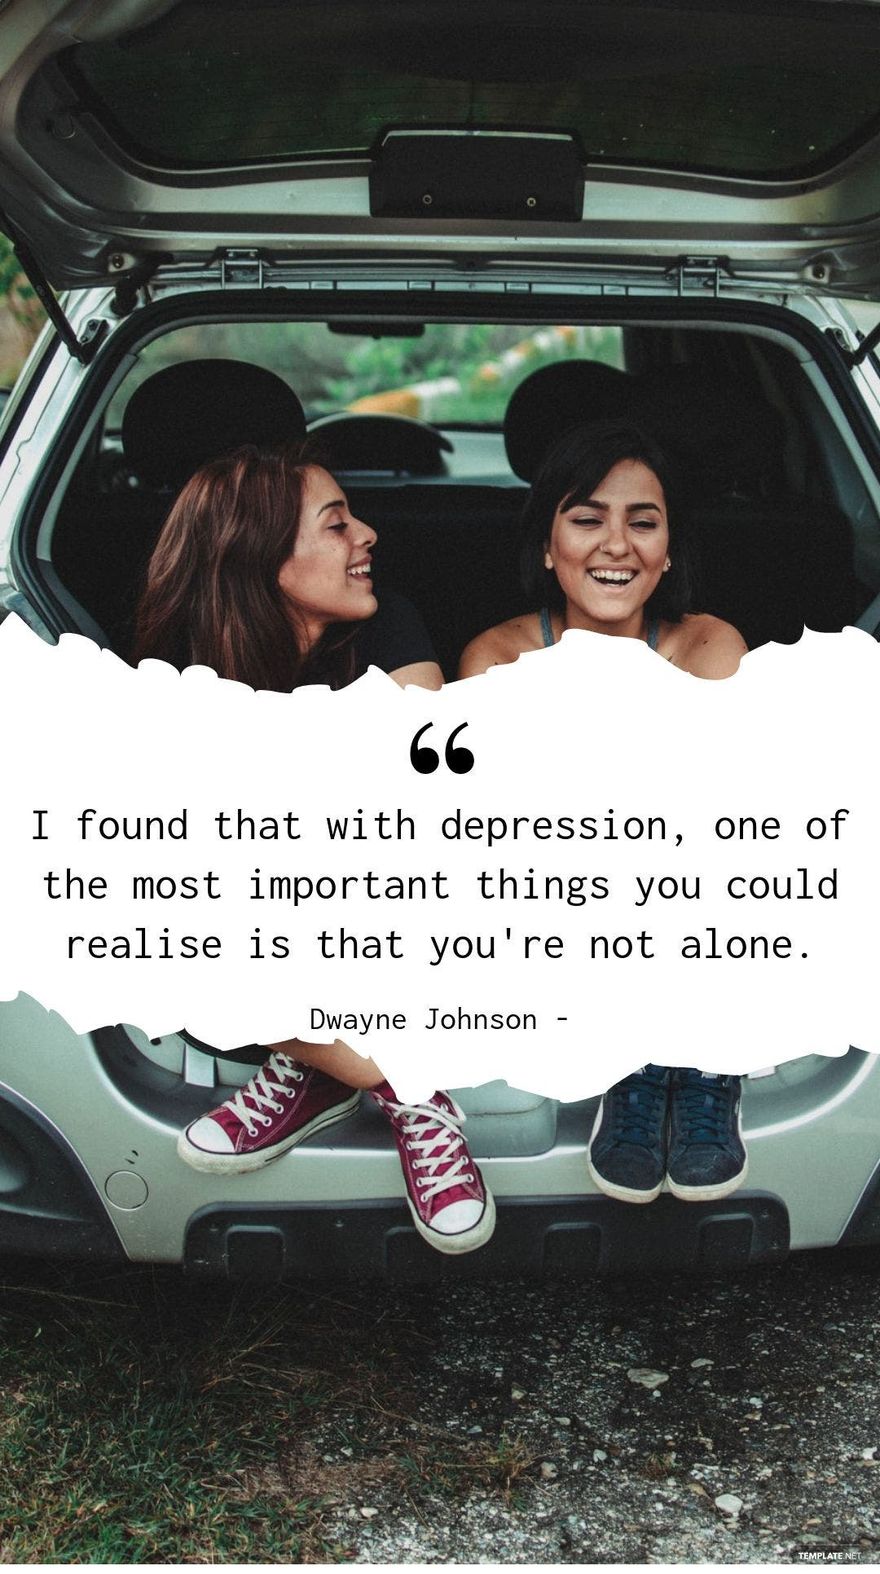 Dwayne Johnson - I found that with depression, one of the most important things you could realise is that you're not alone. Template